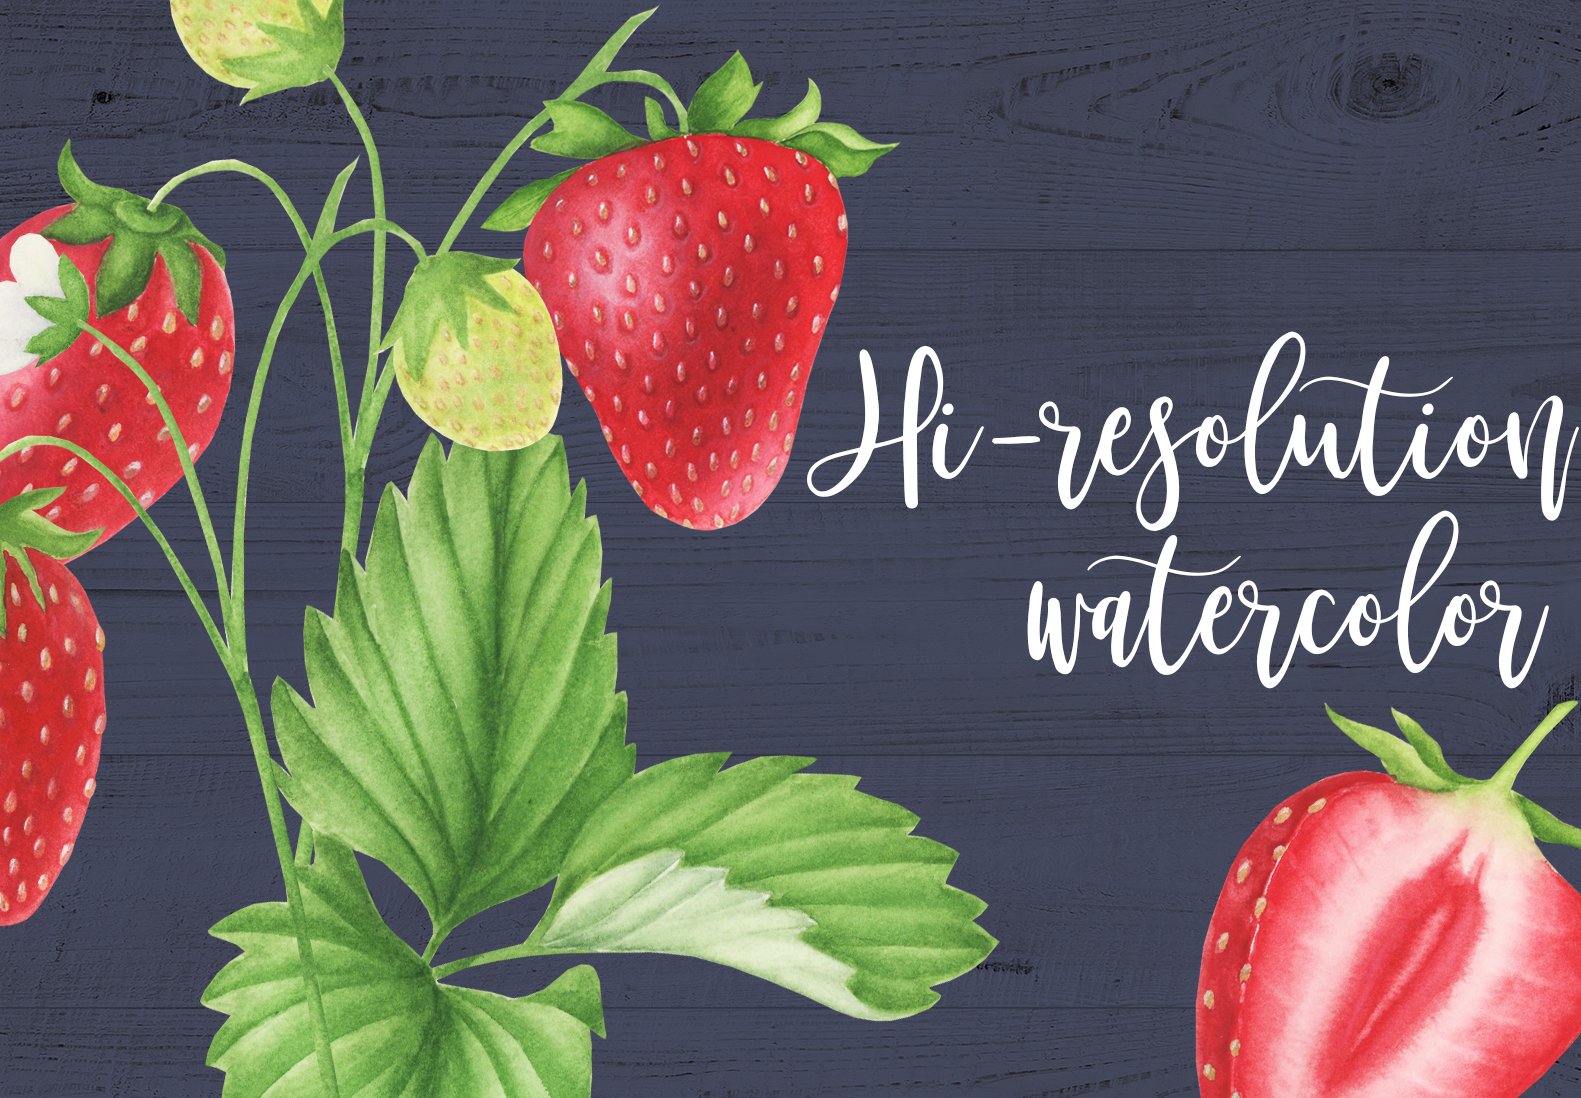 Black matte background with the colorful strawberry illustration.